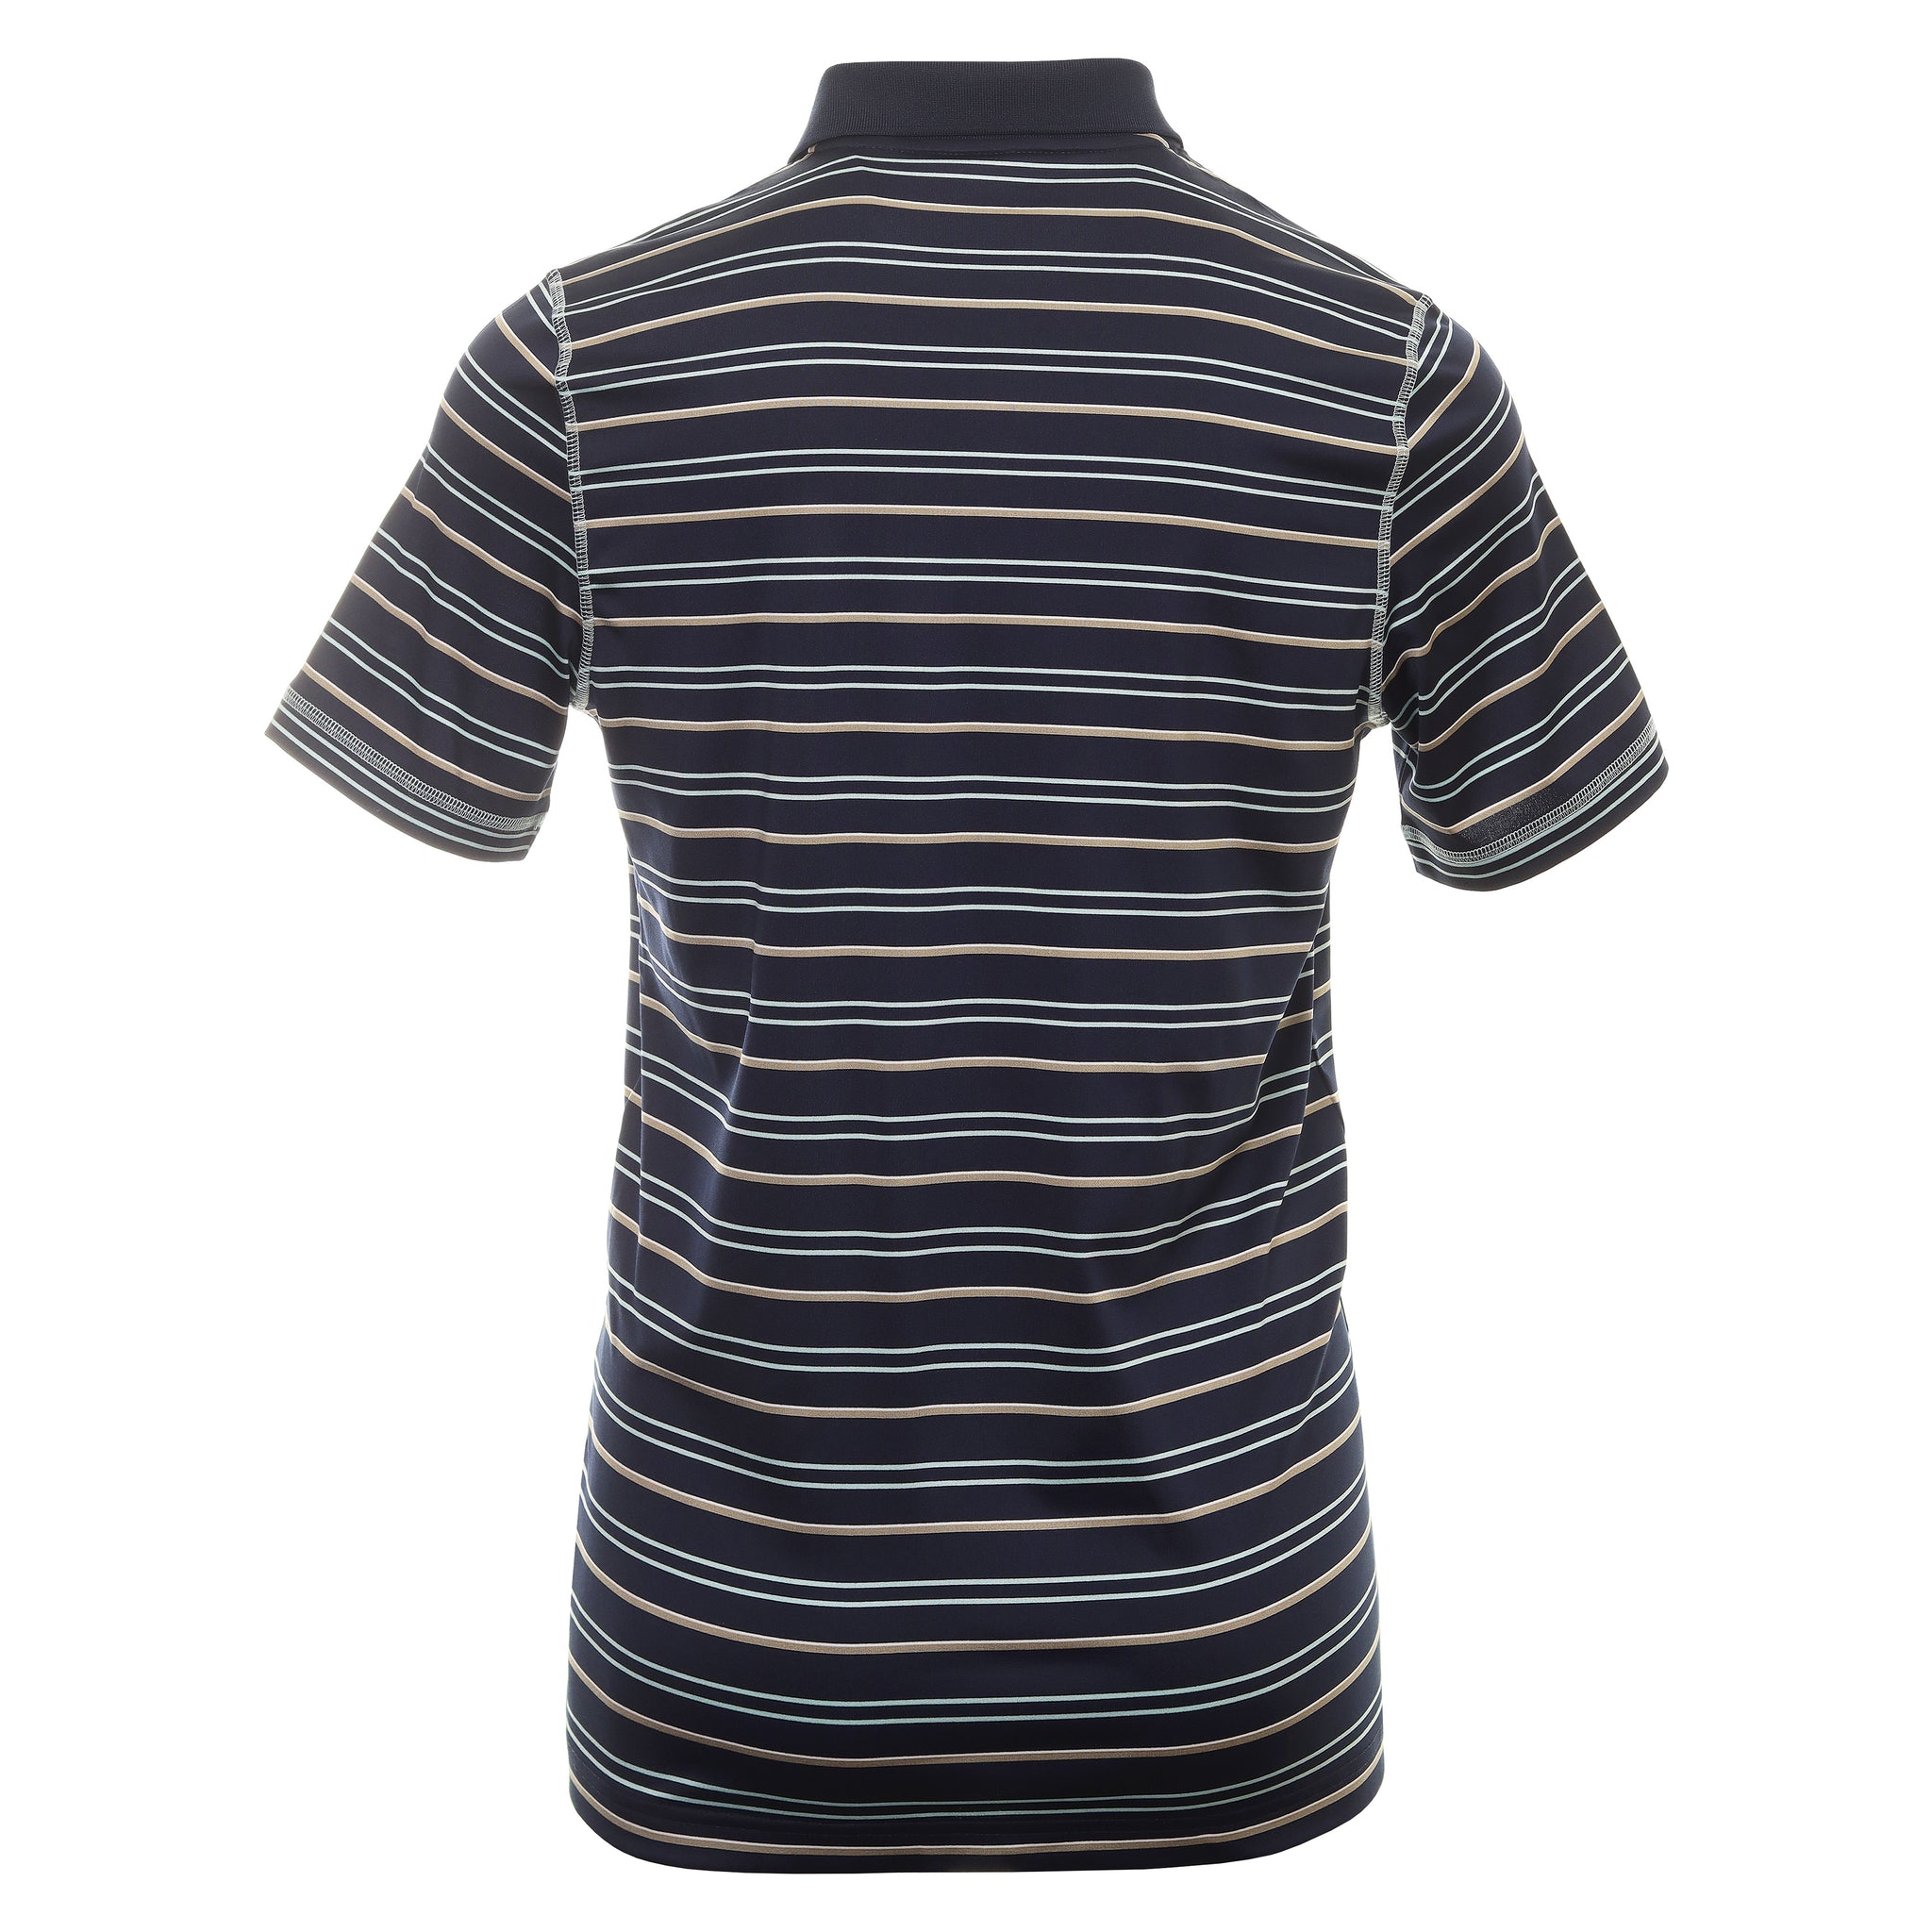 Lacoste Golf All Over Stripe Polo Shirt DH5182 Navy Blue Beige White ...